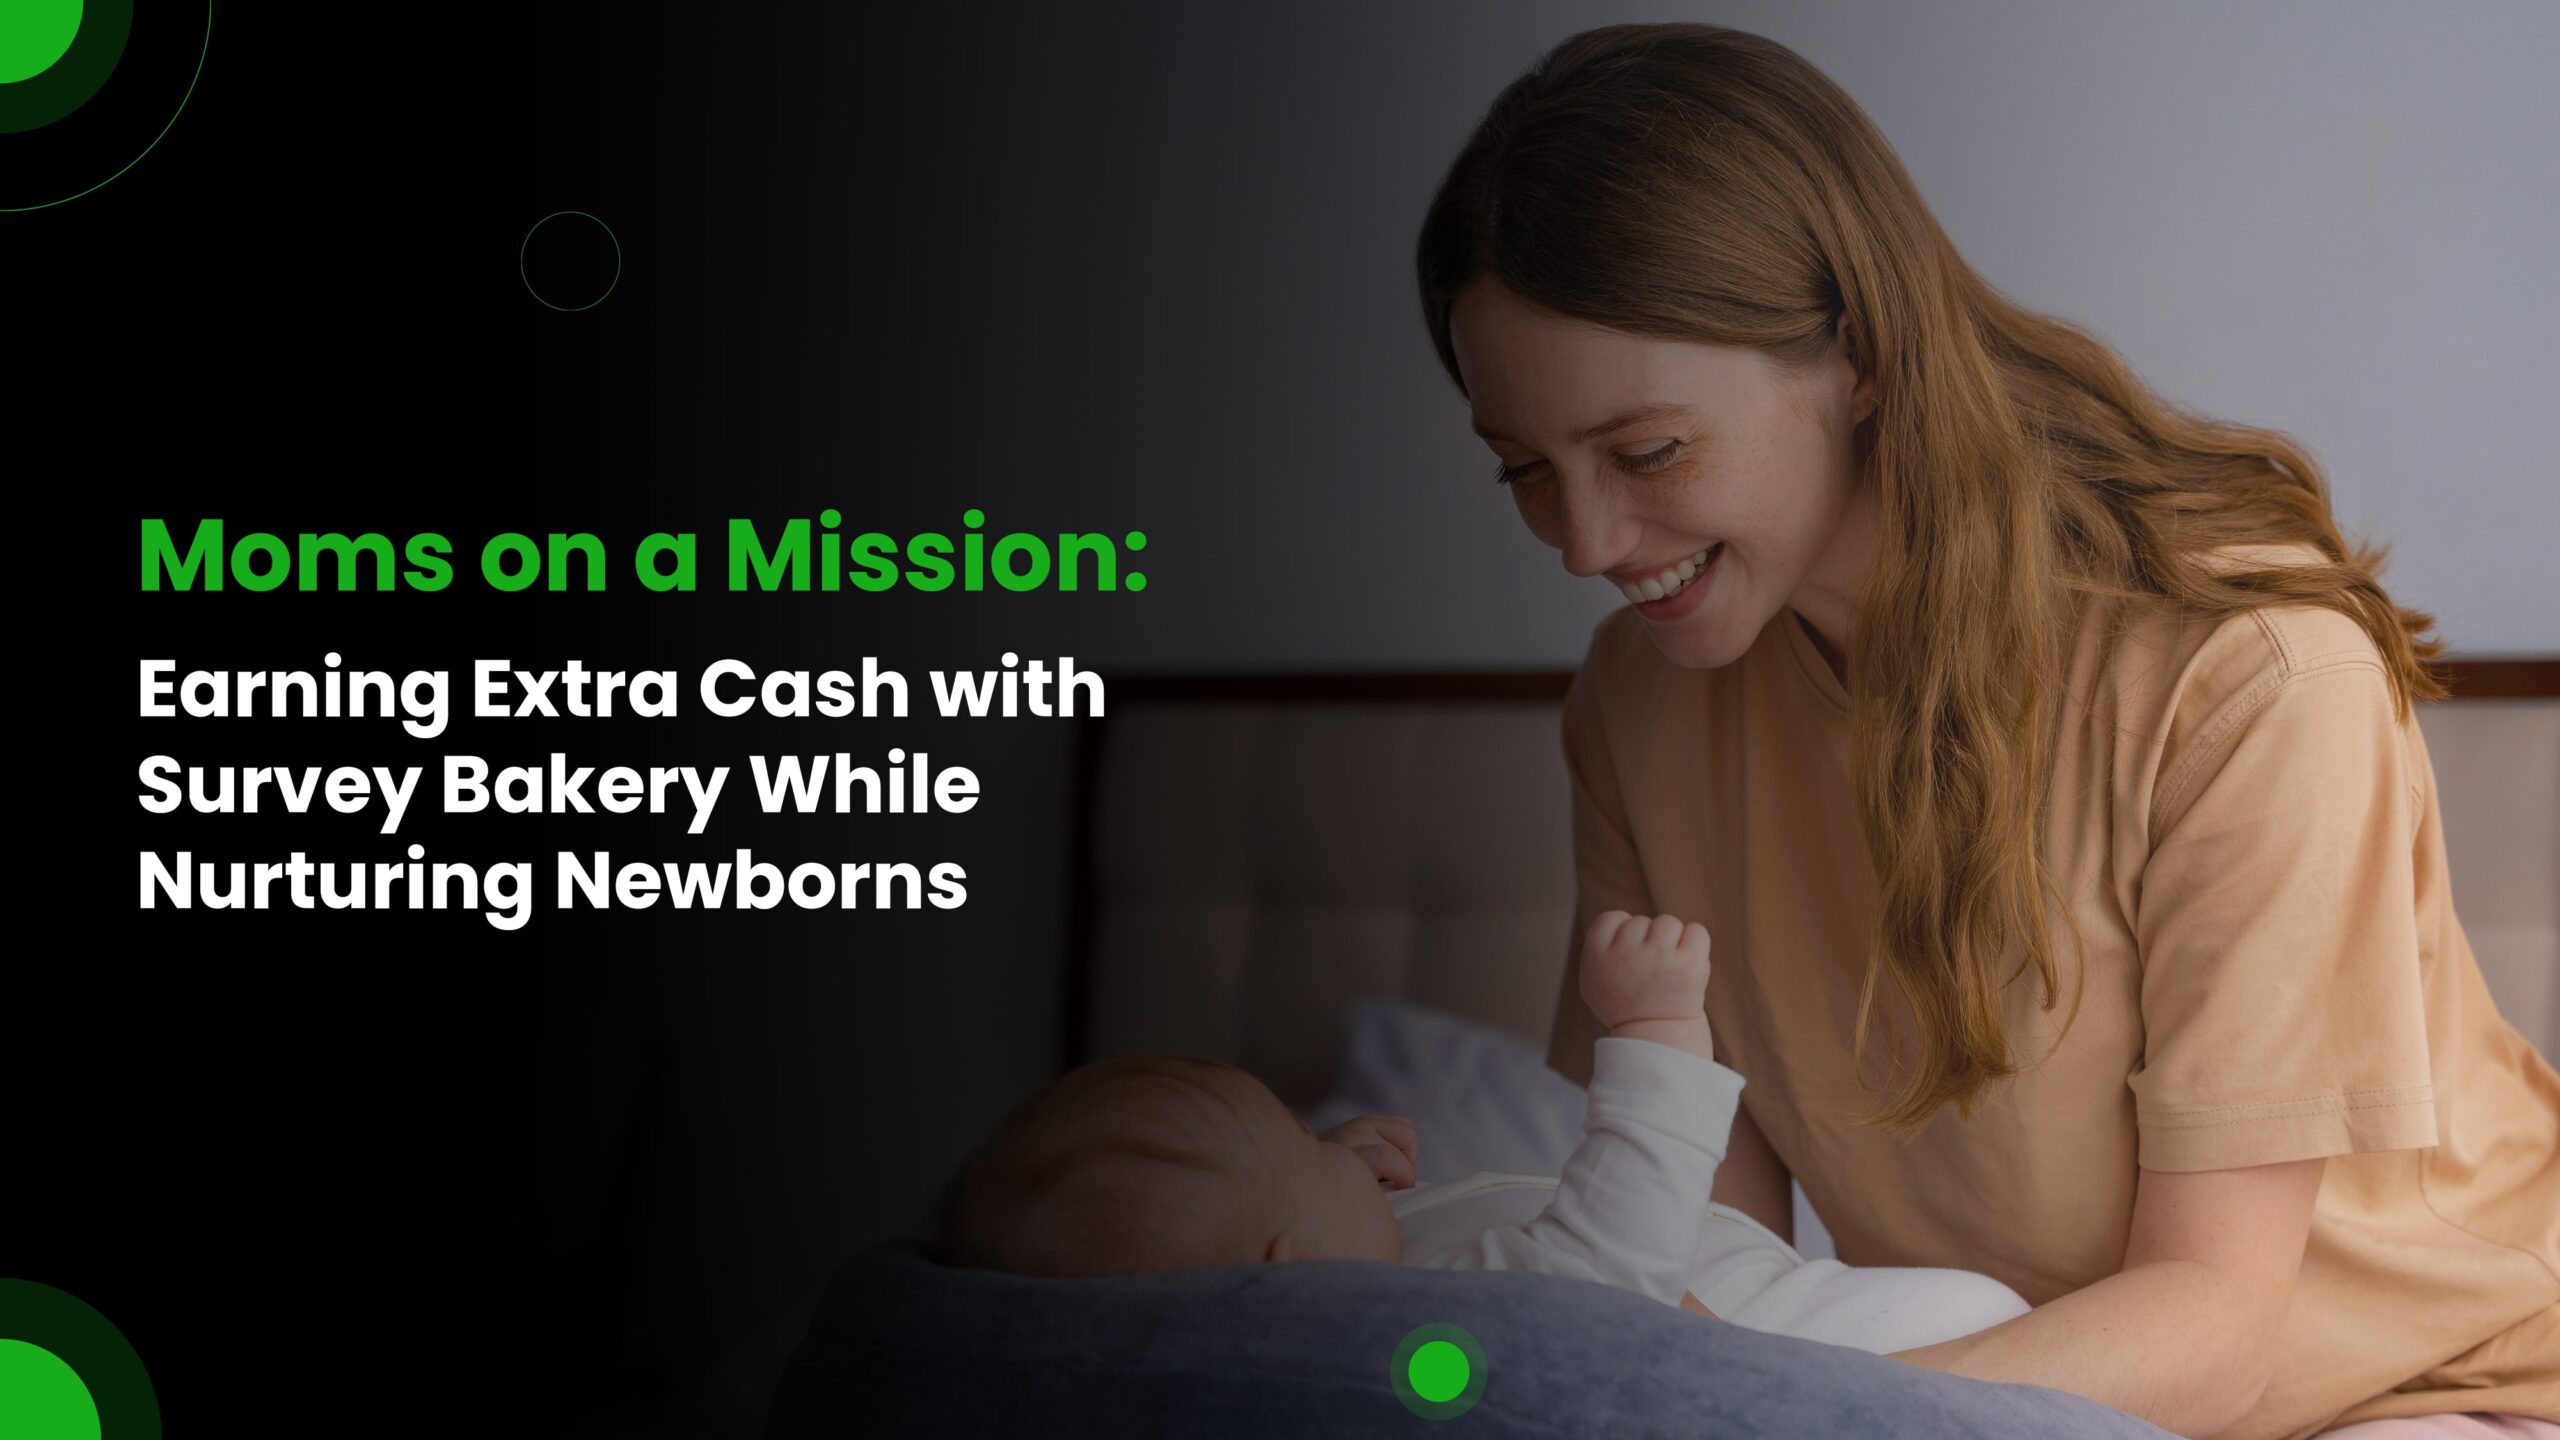 You are currently viewing Moms on a Mission: Earning Extra Cash with Survey Bakery While Nurturing Newborns